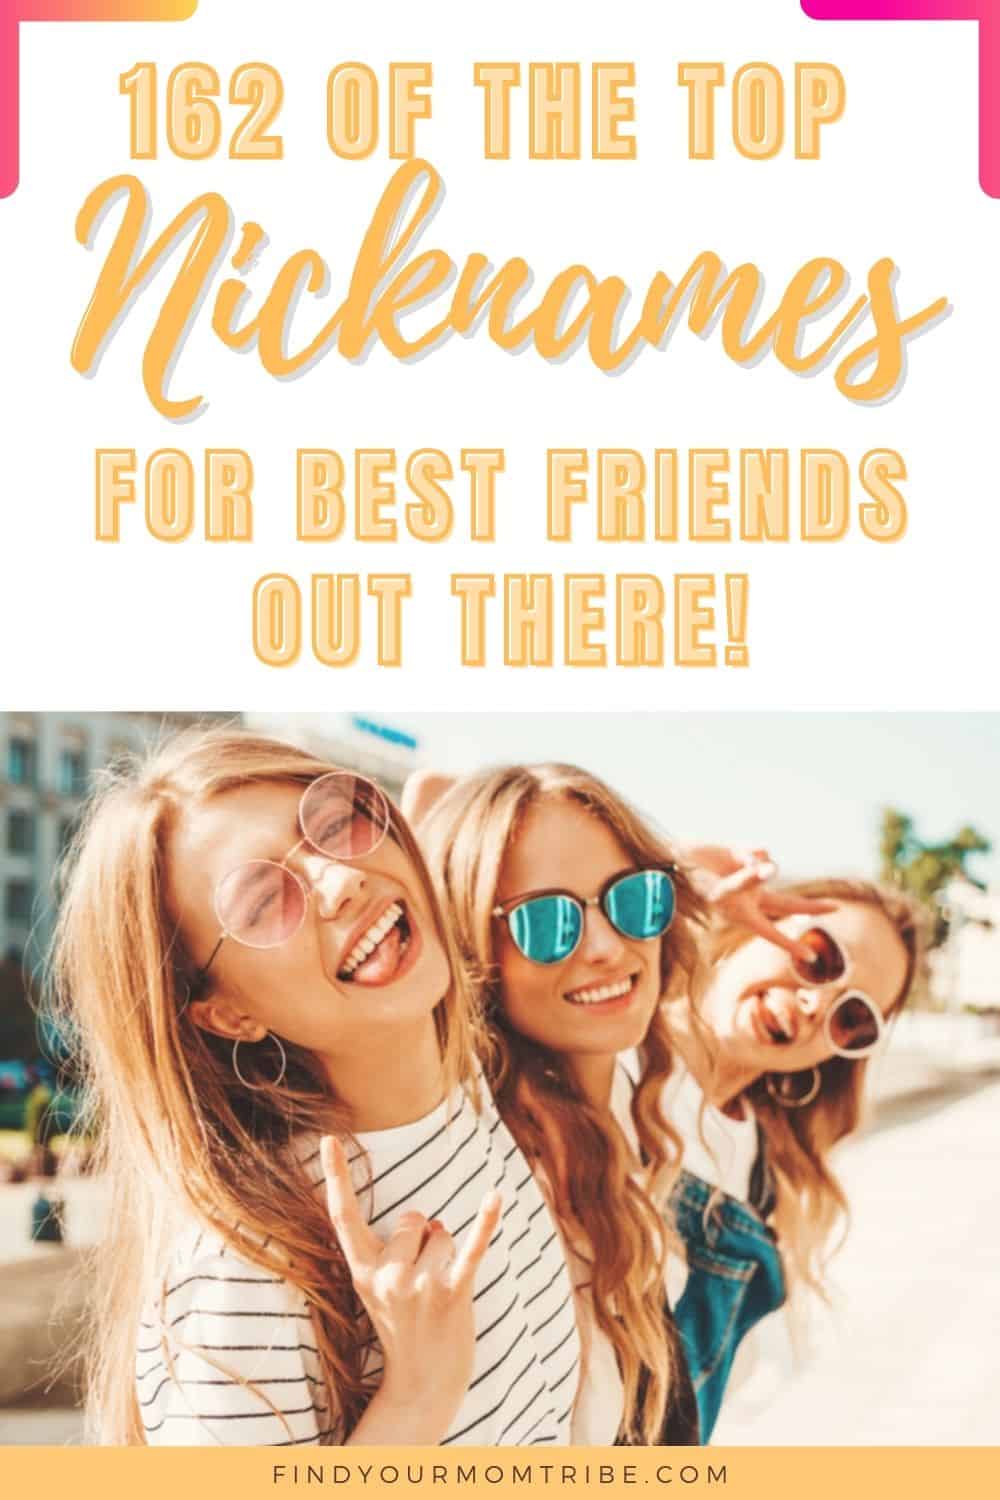 162 Cool And Funny Nicknames For Best Friends To Have Fun With